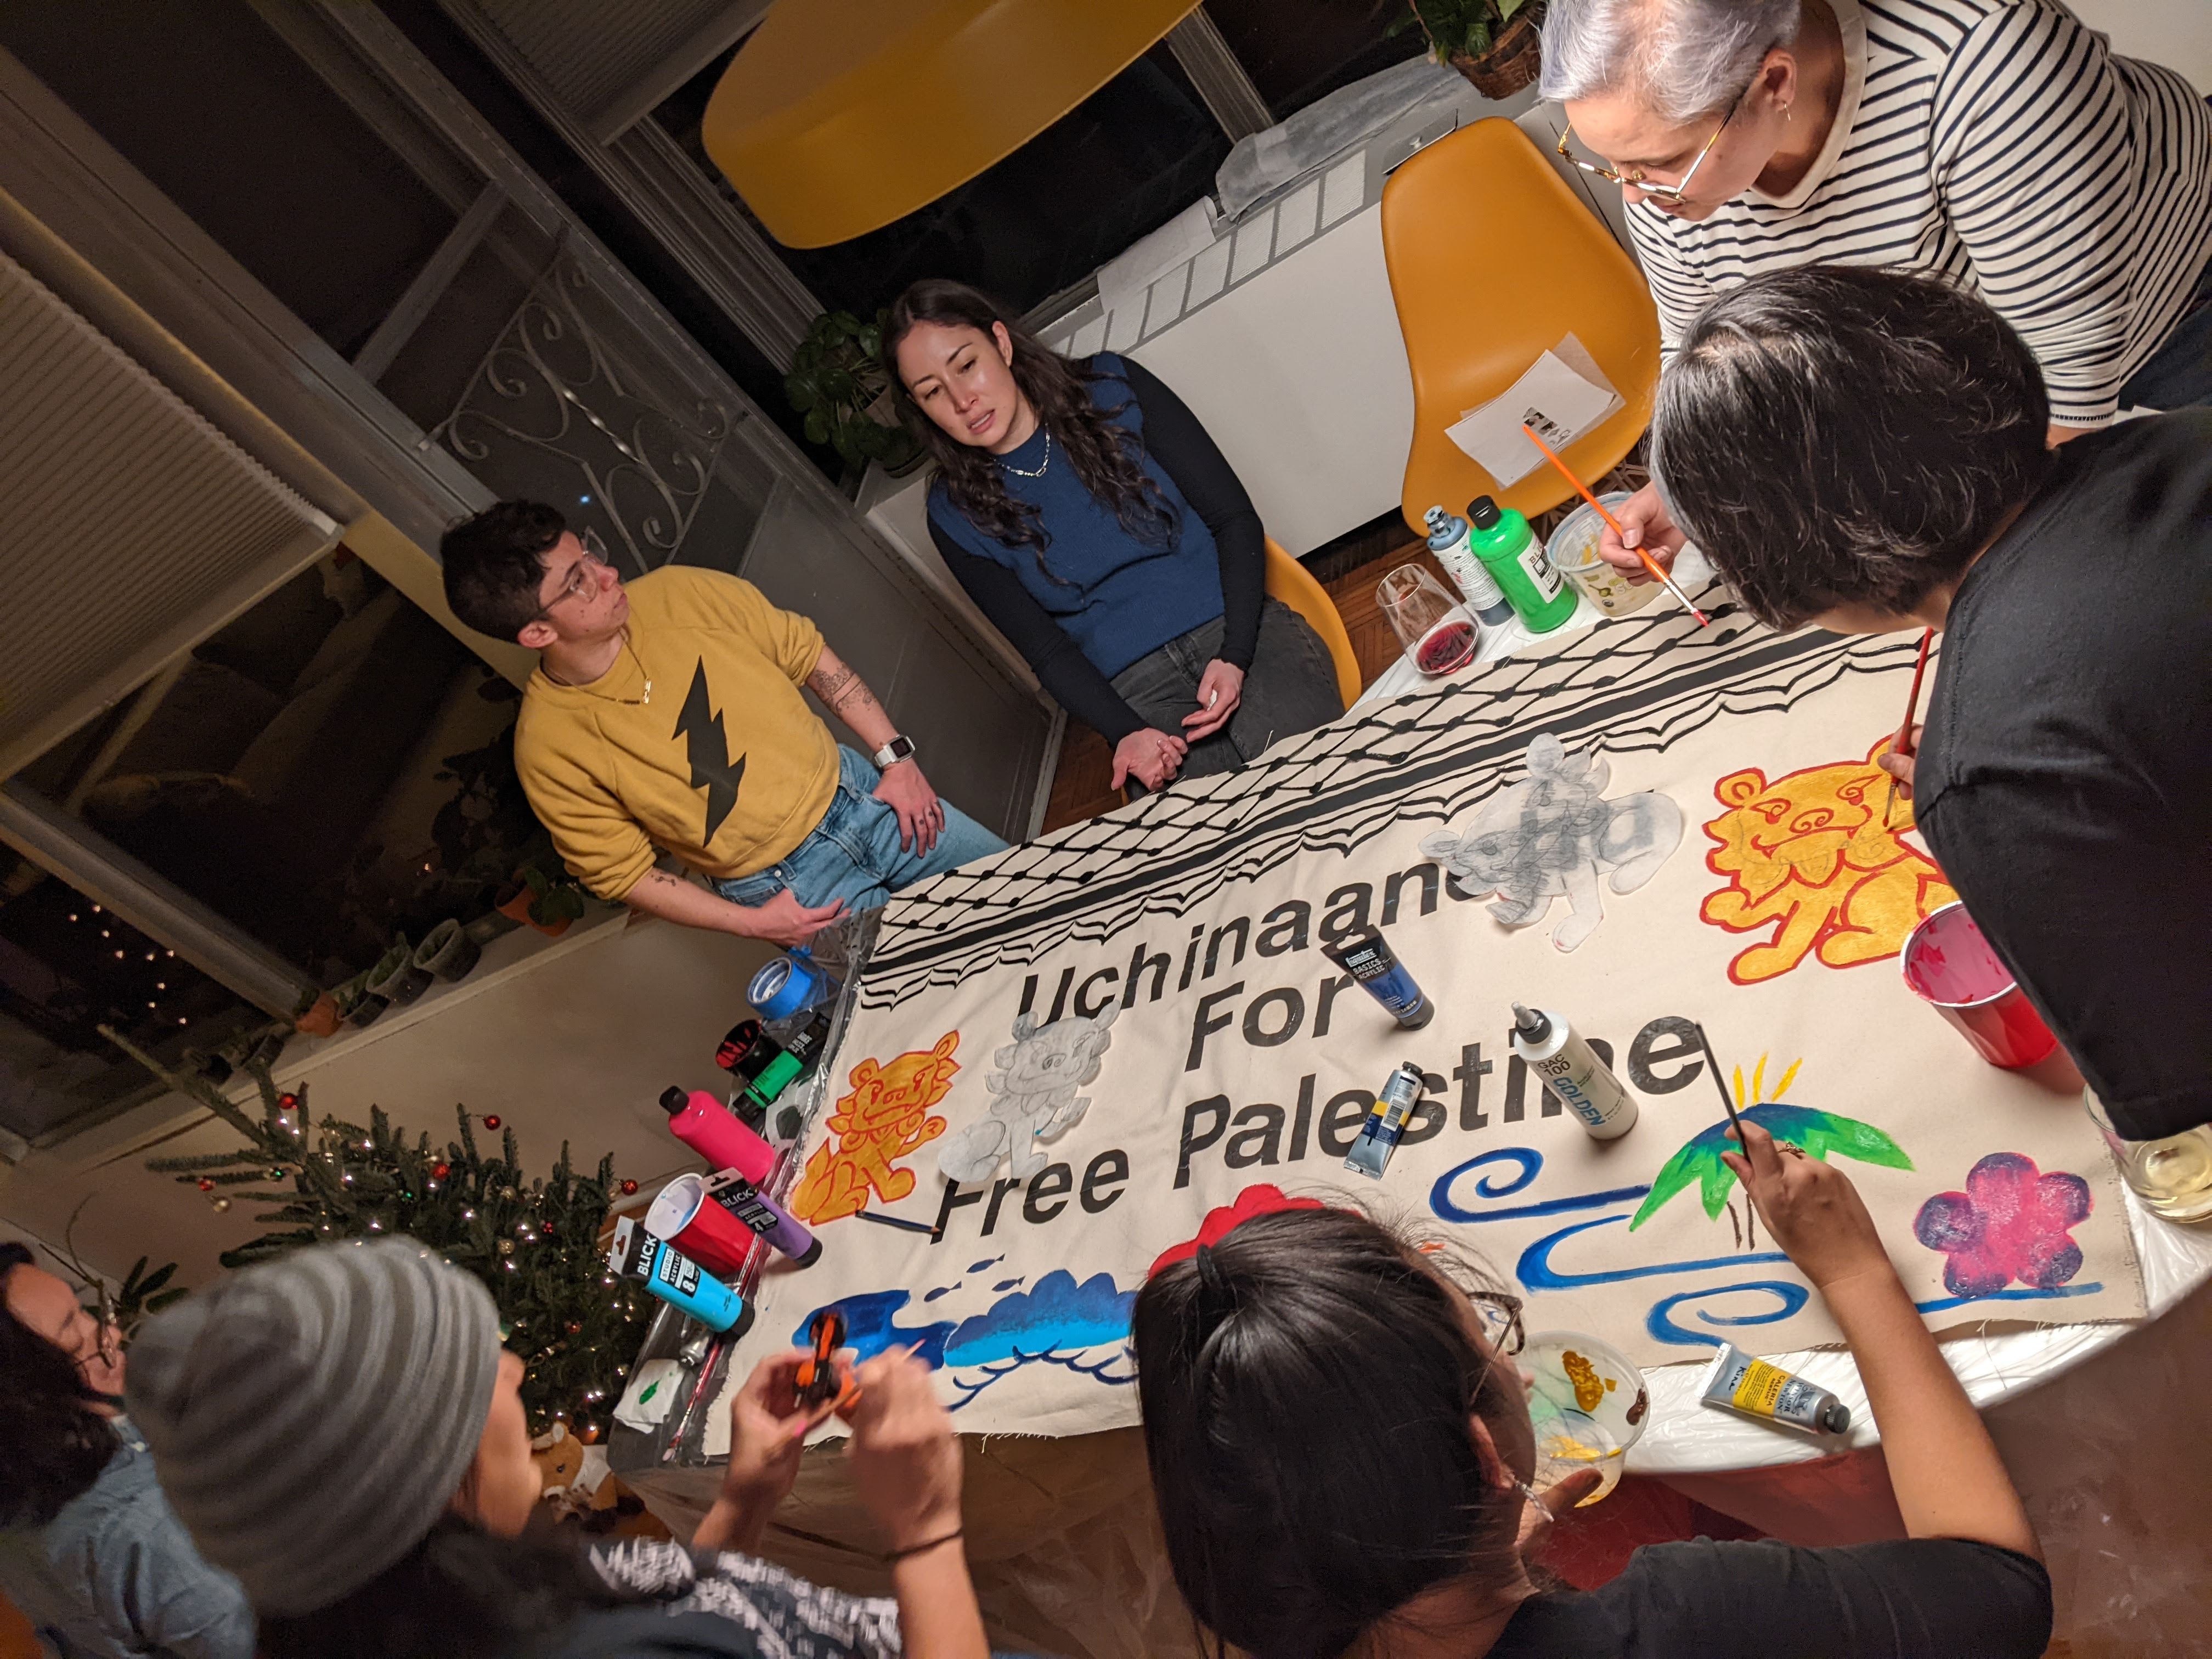 photo of several diasporic uchinanchu people painting a banner in support of palestine